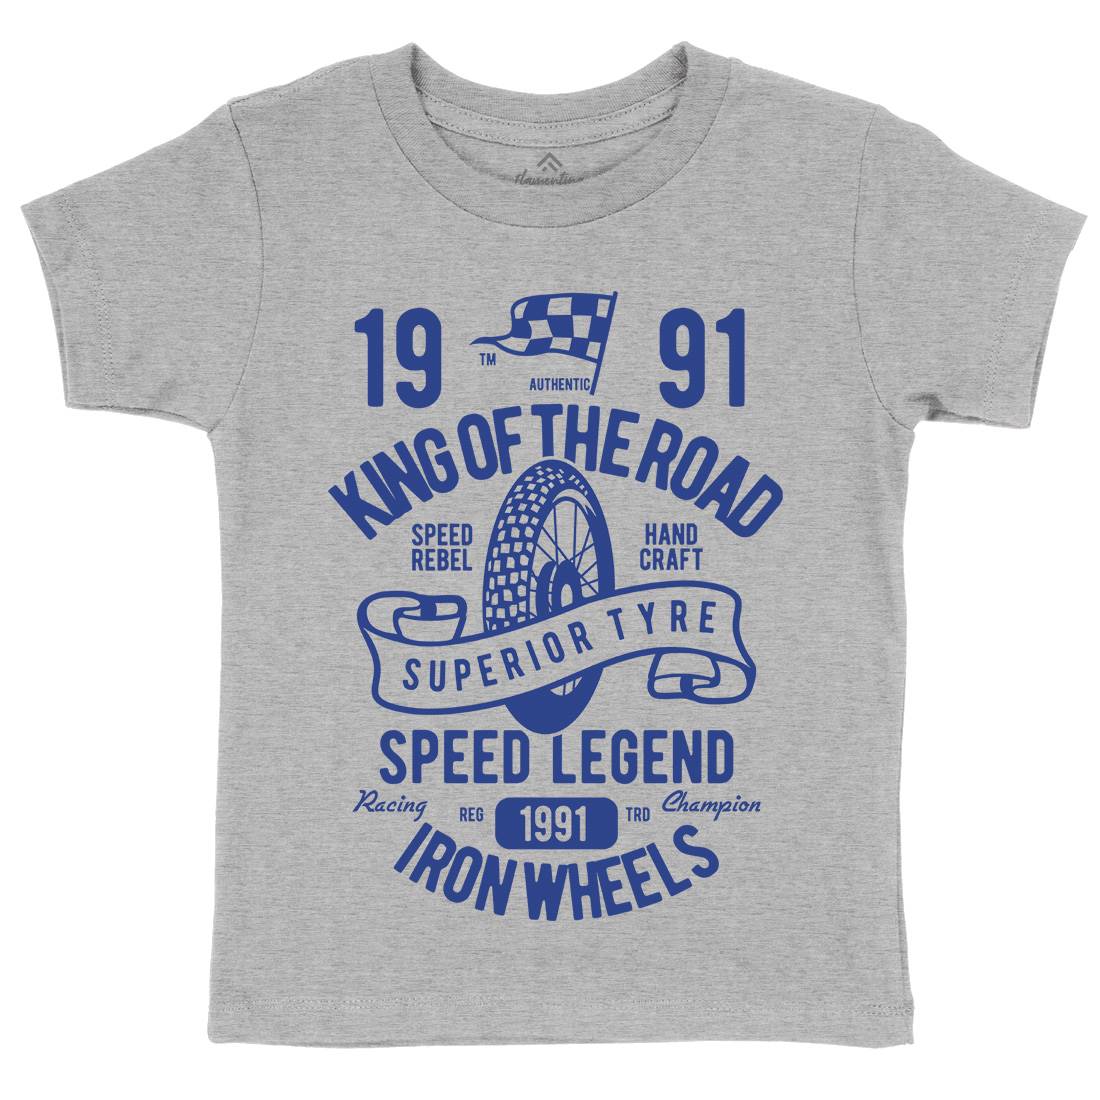 Superior Tyre King Of The Road Kids Organic Crew Neck T-Shirt Motorcycles B458